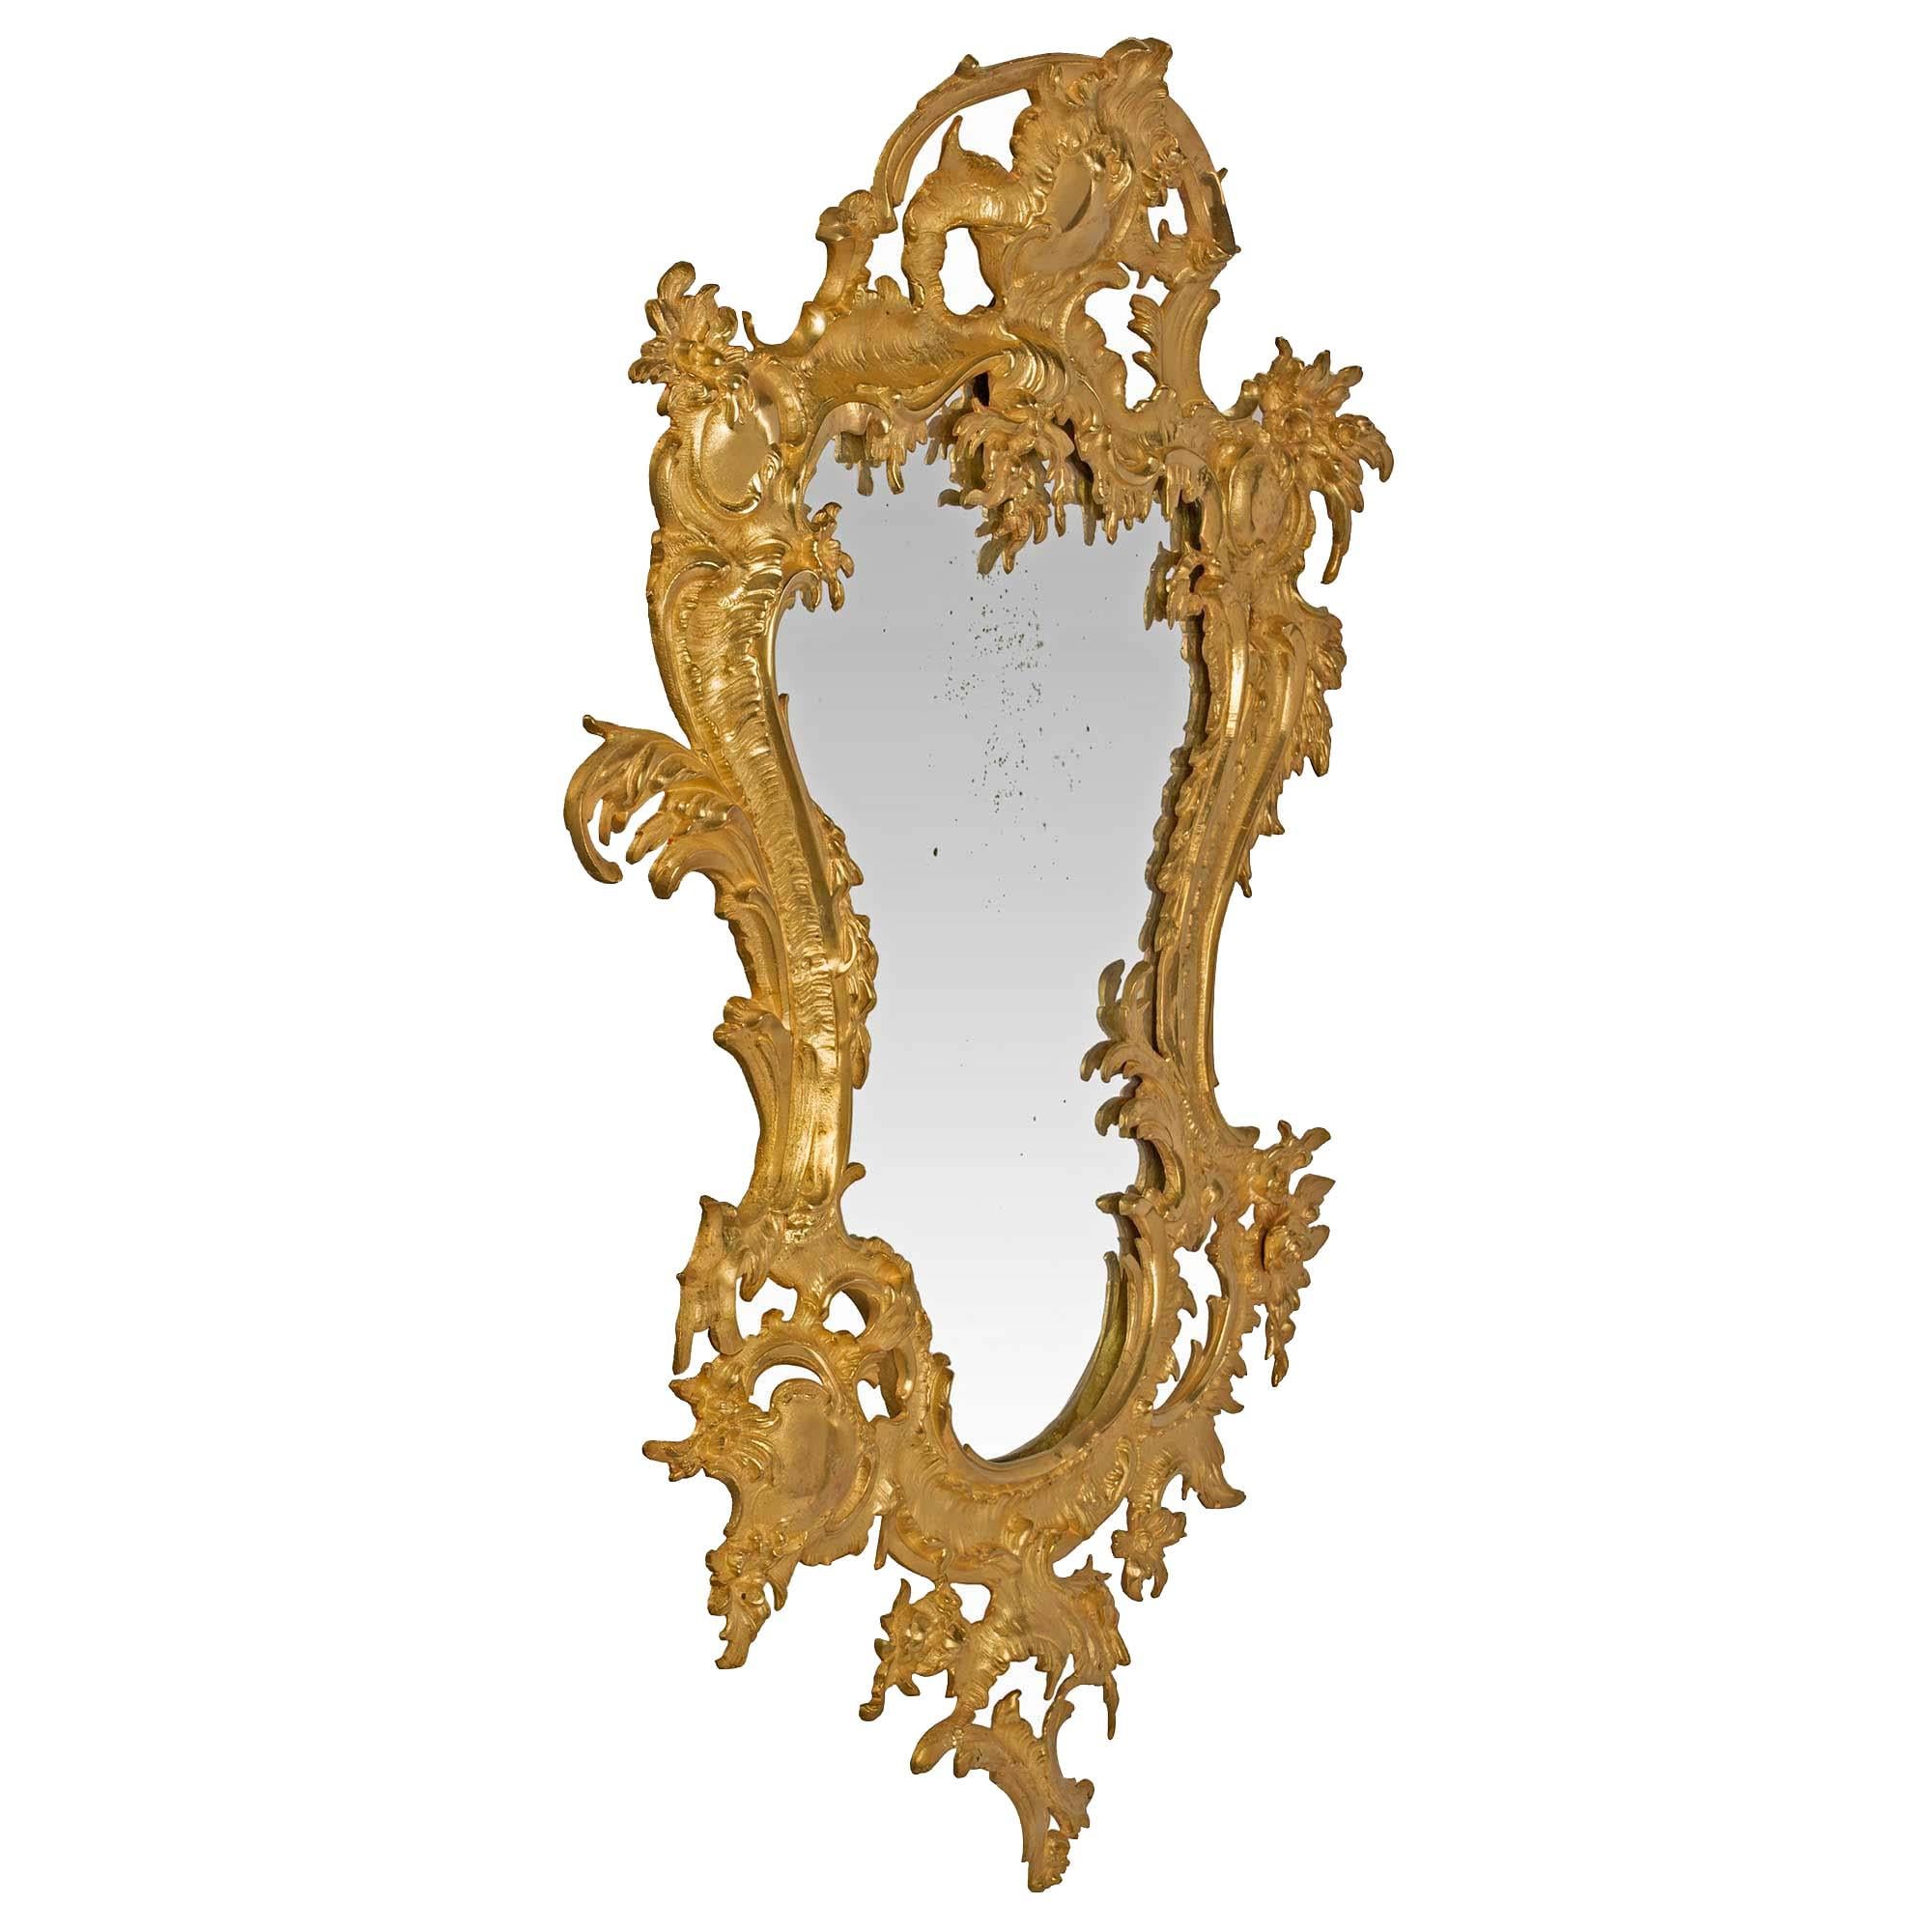 A fanciful small-scale French 19th century Louis XV style ormolu mirror with its original mirror plate. The ormolu frame has a pierced design, with various scrolls amidst foliate and cabochons on both sides, as well as the top central reserve. The